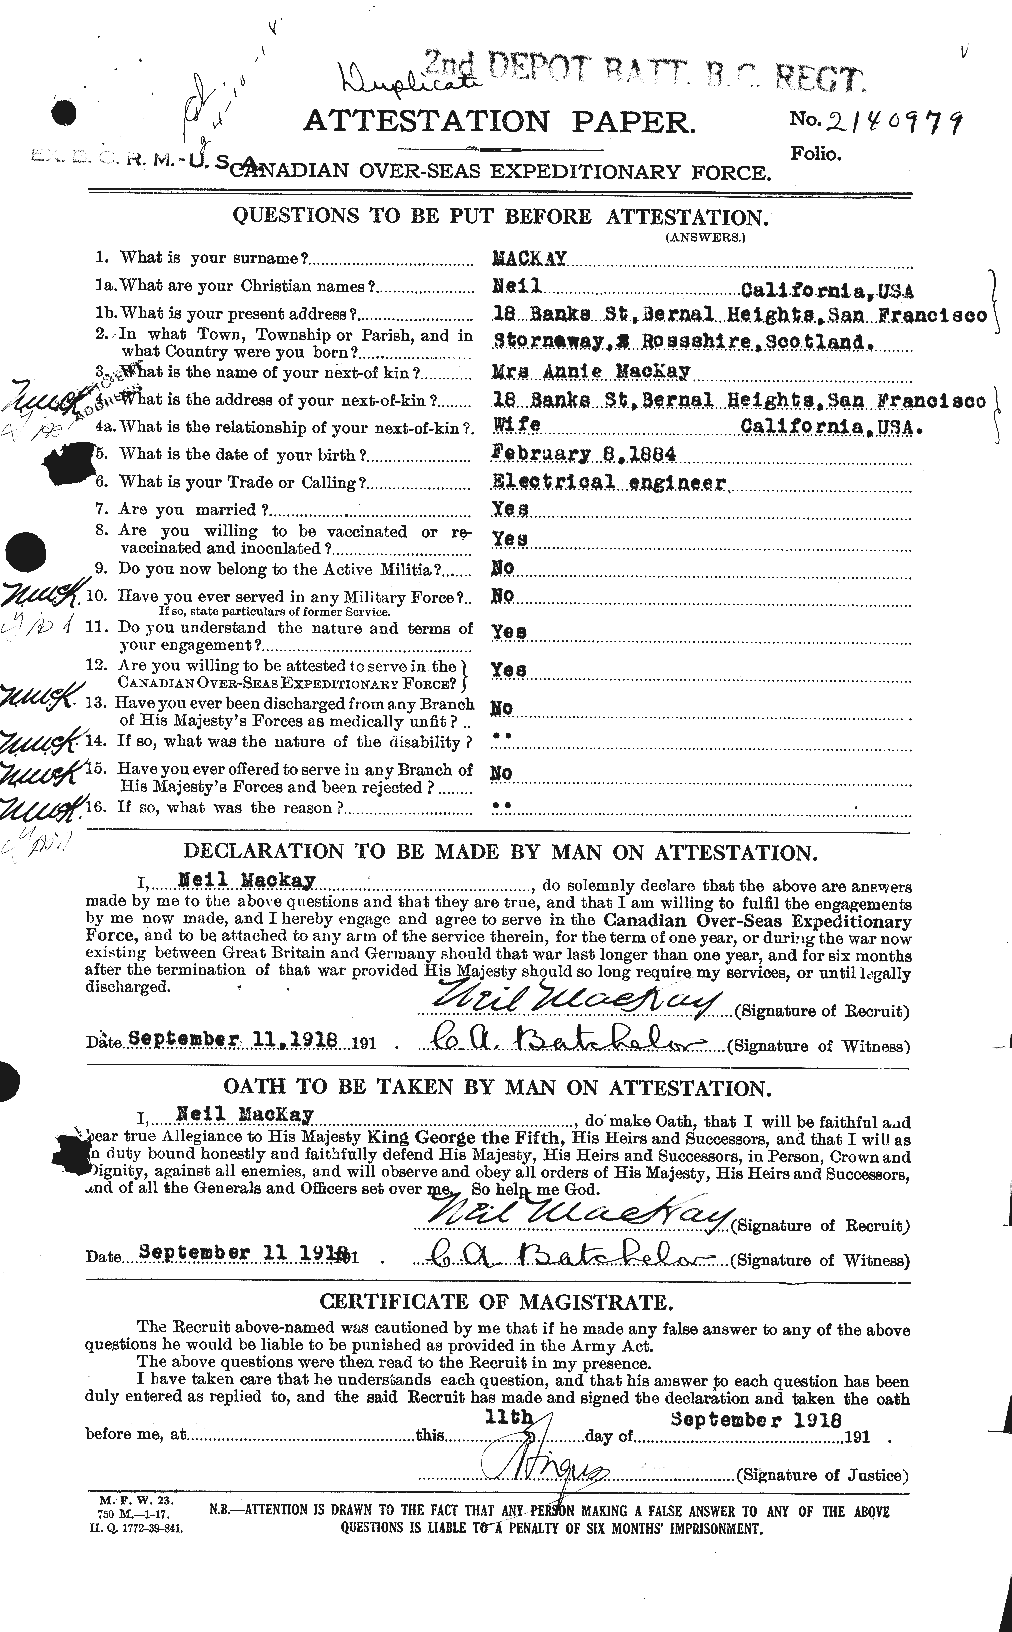 Personnel Records of the First World War - CEF 527197a